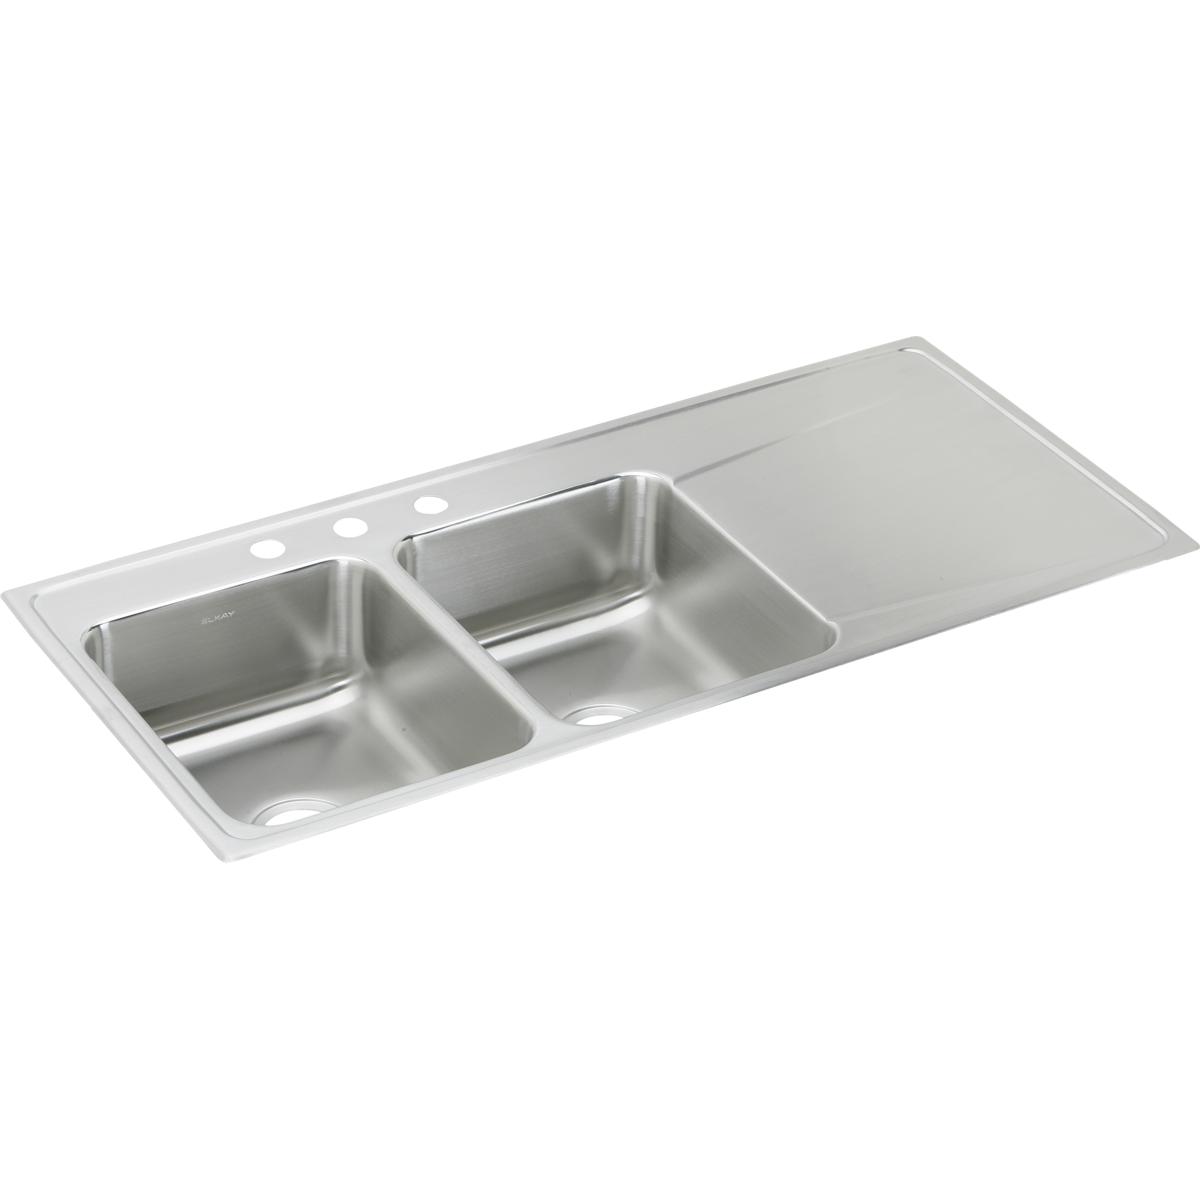 Elkay Lustertone Classic Stainless Steel 48" x 22" x 7-5/8" Equal Double Bowl Drop-in Sink with Drainboard